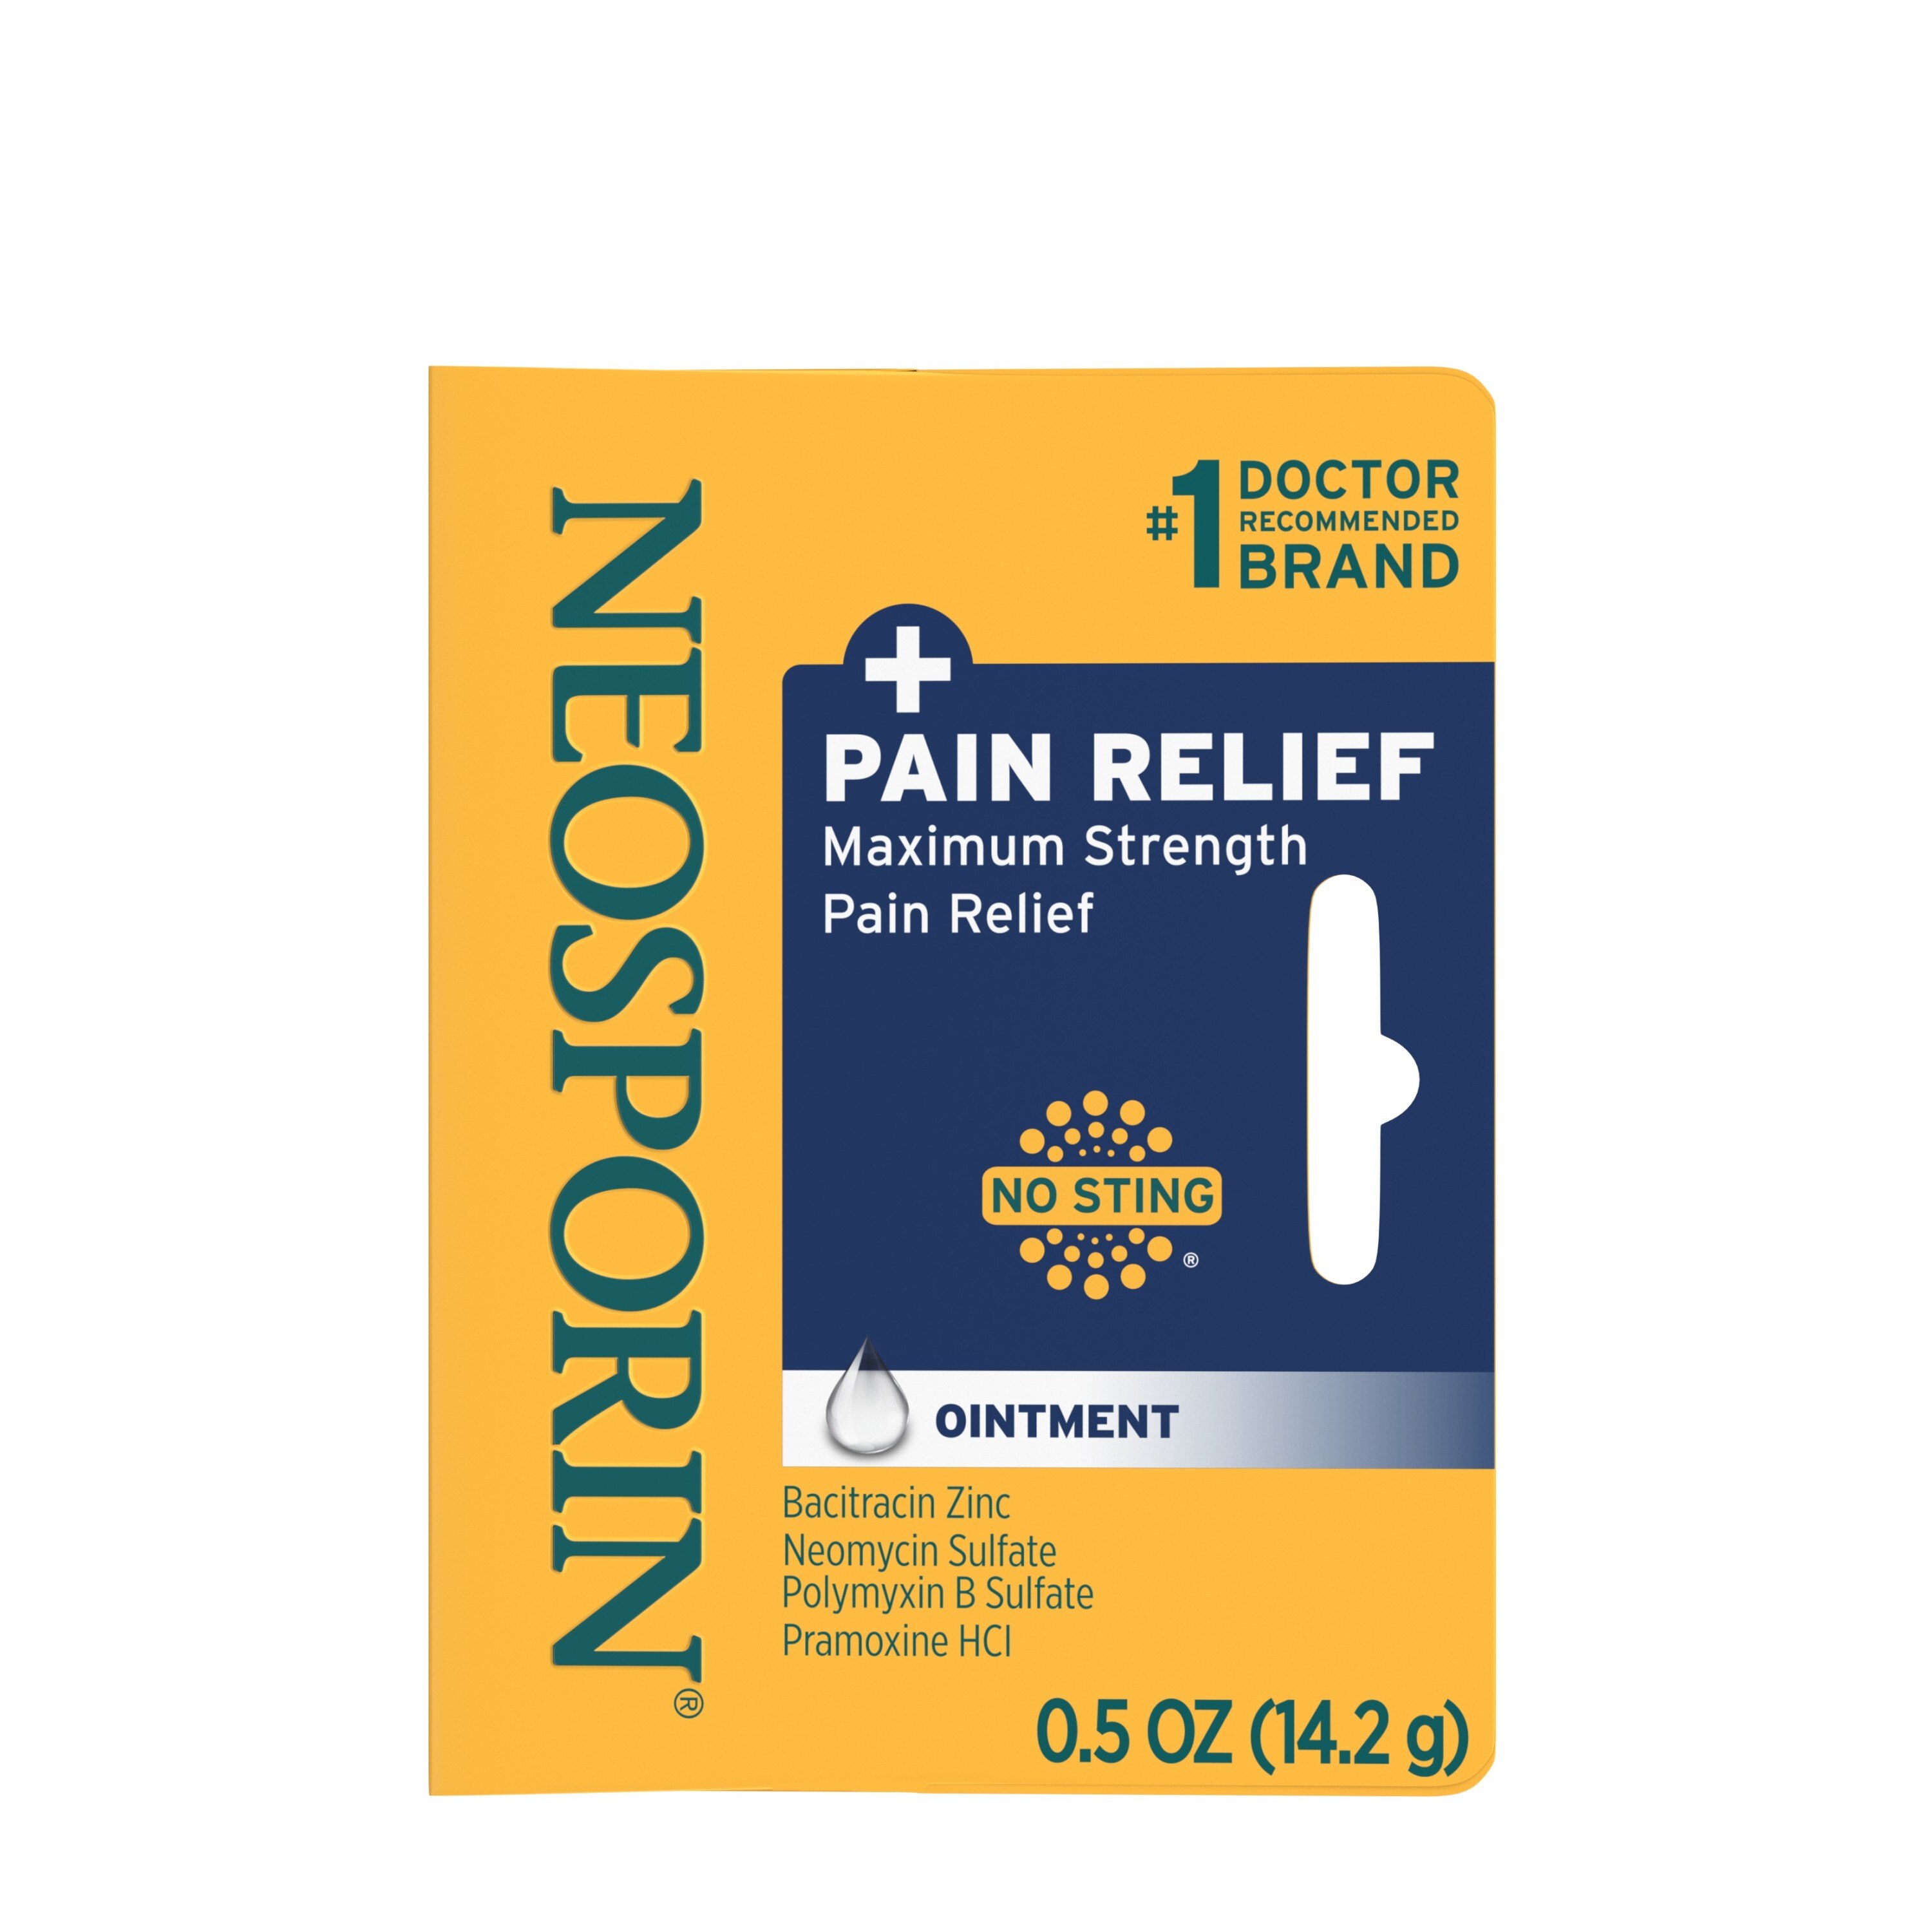 Can You Put Neosporin In Your Eye For A Scratch Neosporin Cream Pain Relief Antibiotic Ointment With Lidocaine